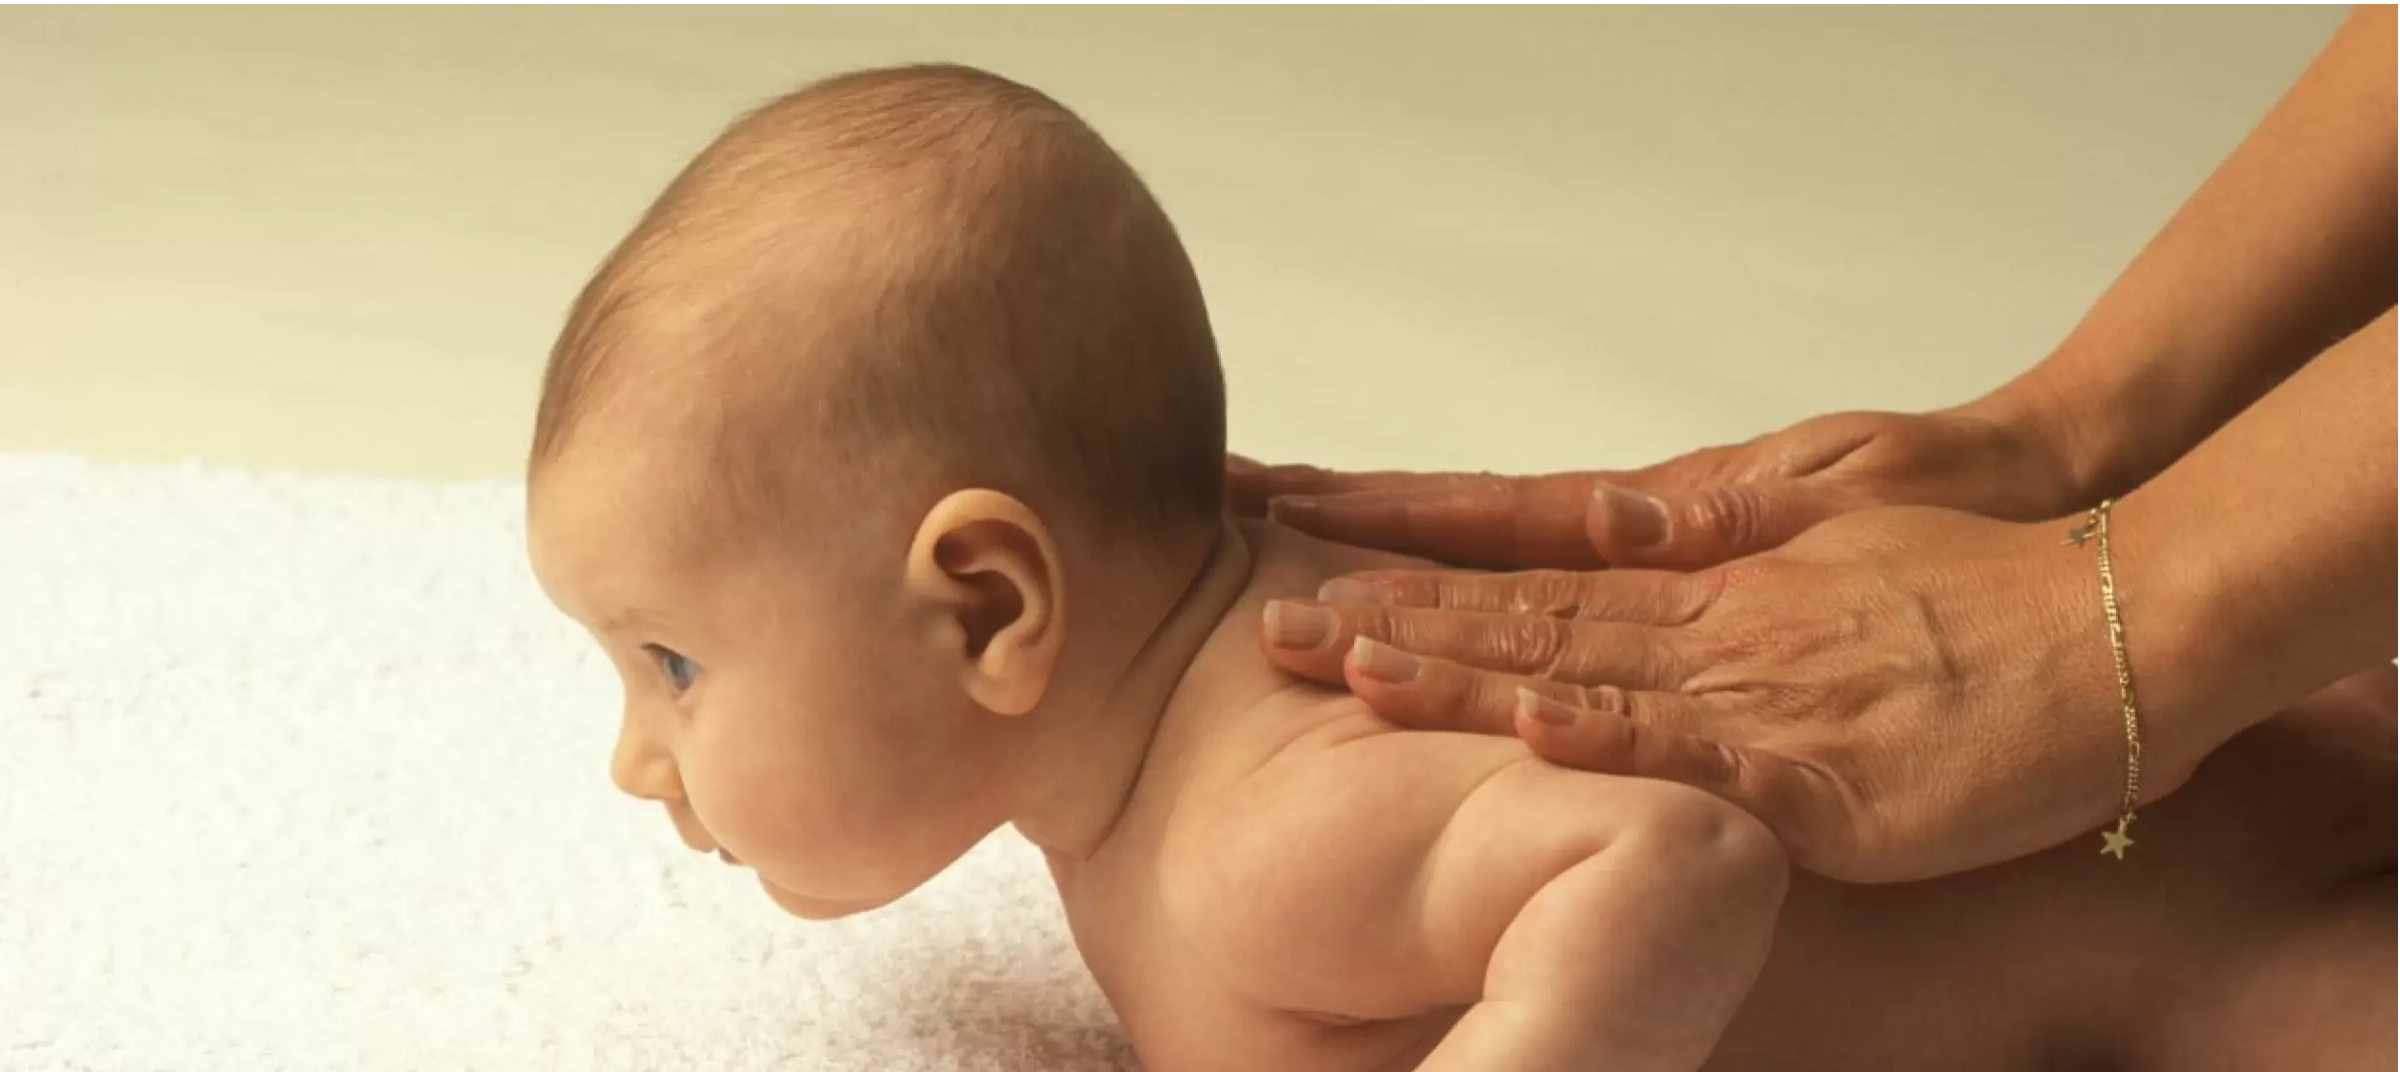 The Week—Should you be massaging your baby?